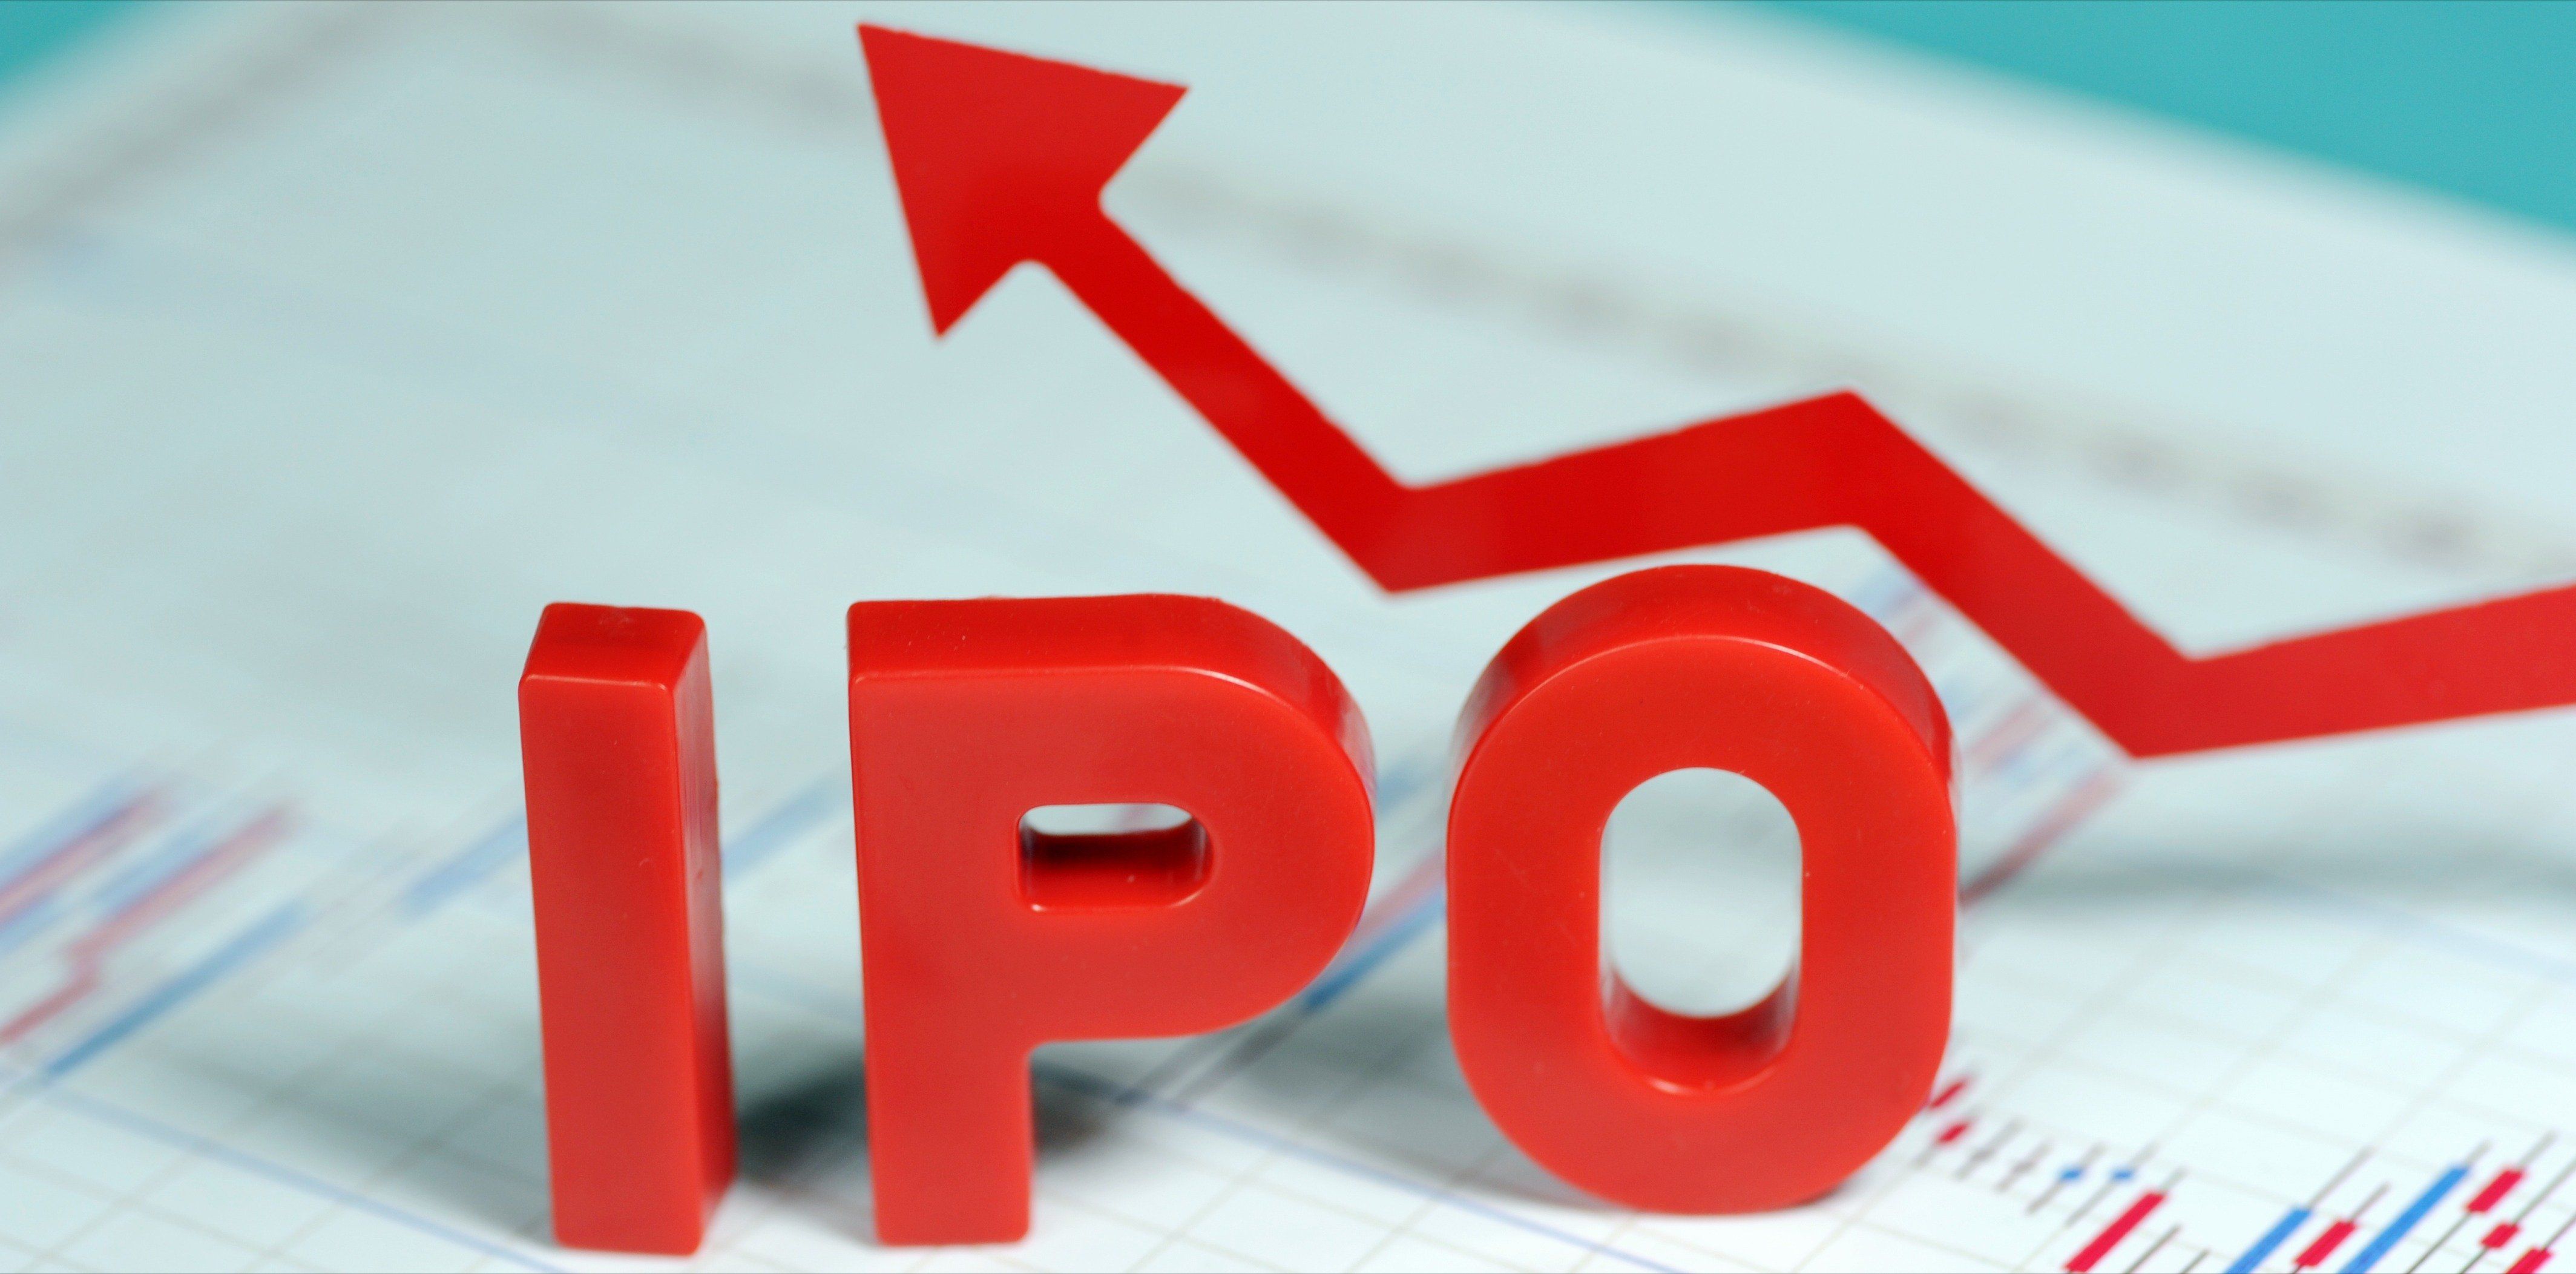 Initial public offering letters, IPO